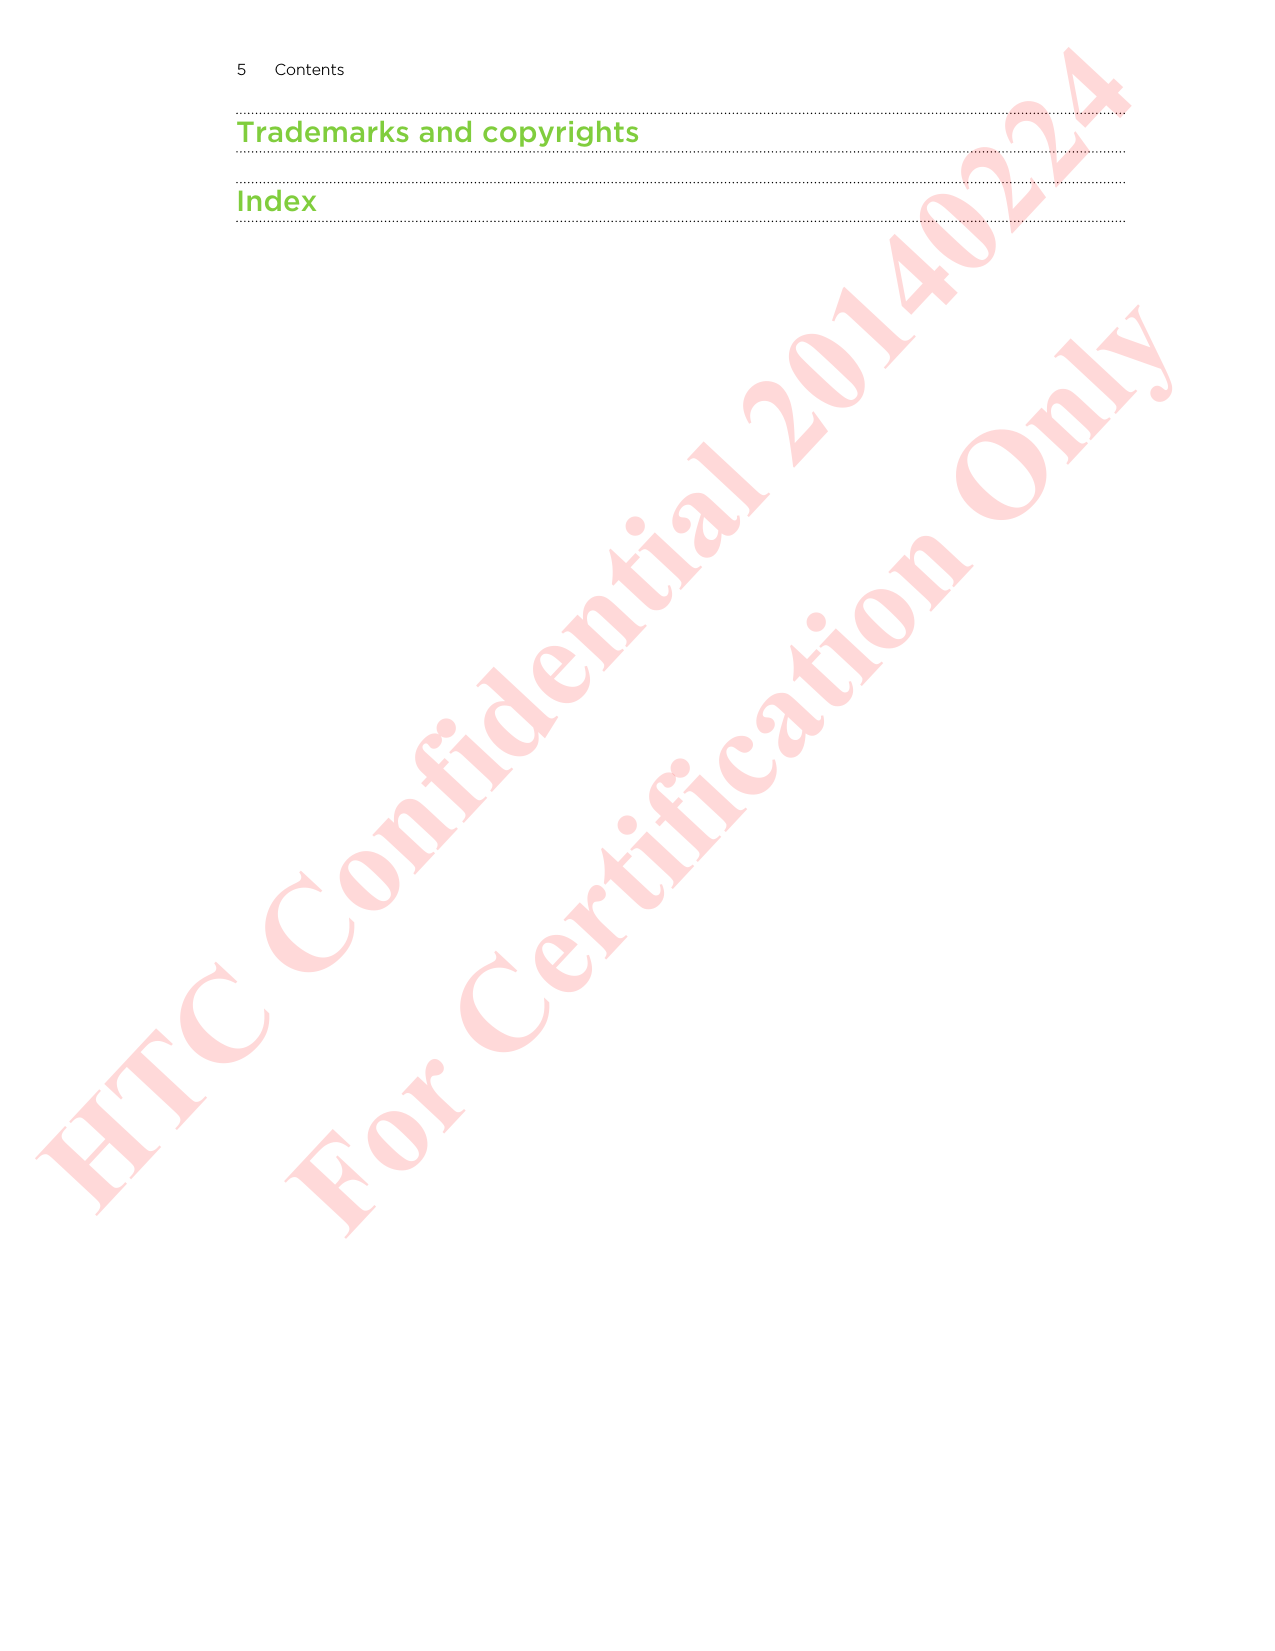 Trademarks and copyrightsIndex5 ContentsHTC Confidential 20140224 For Certification Only